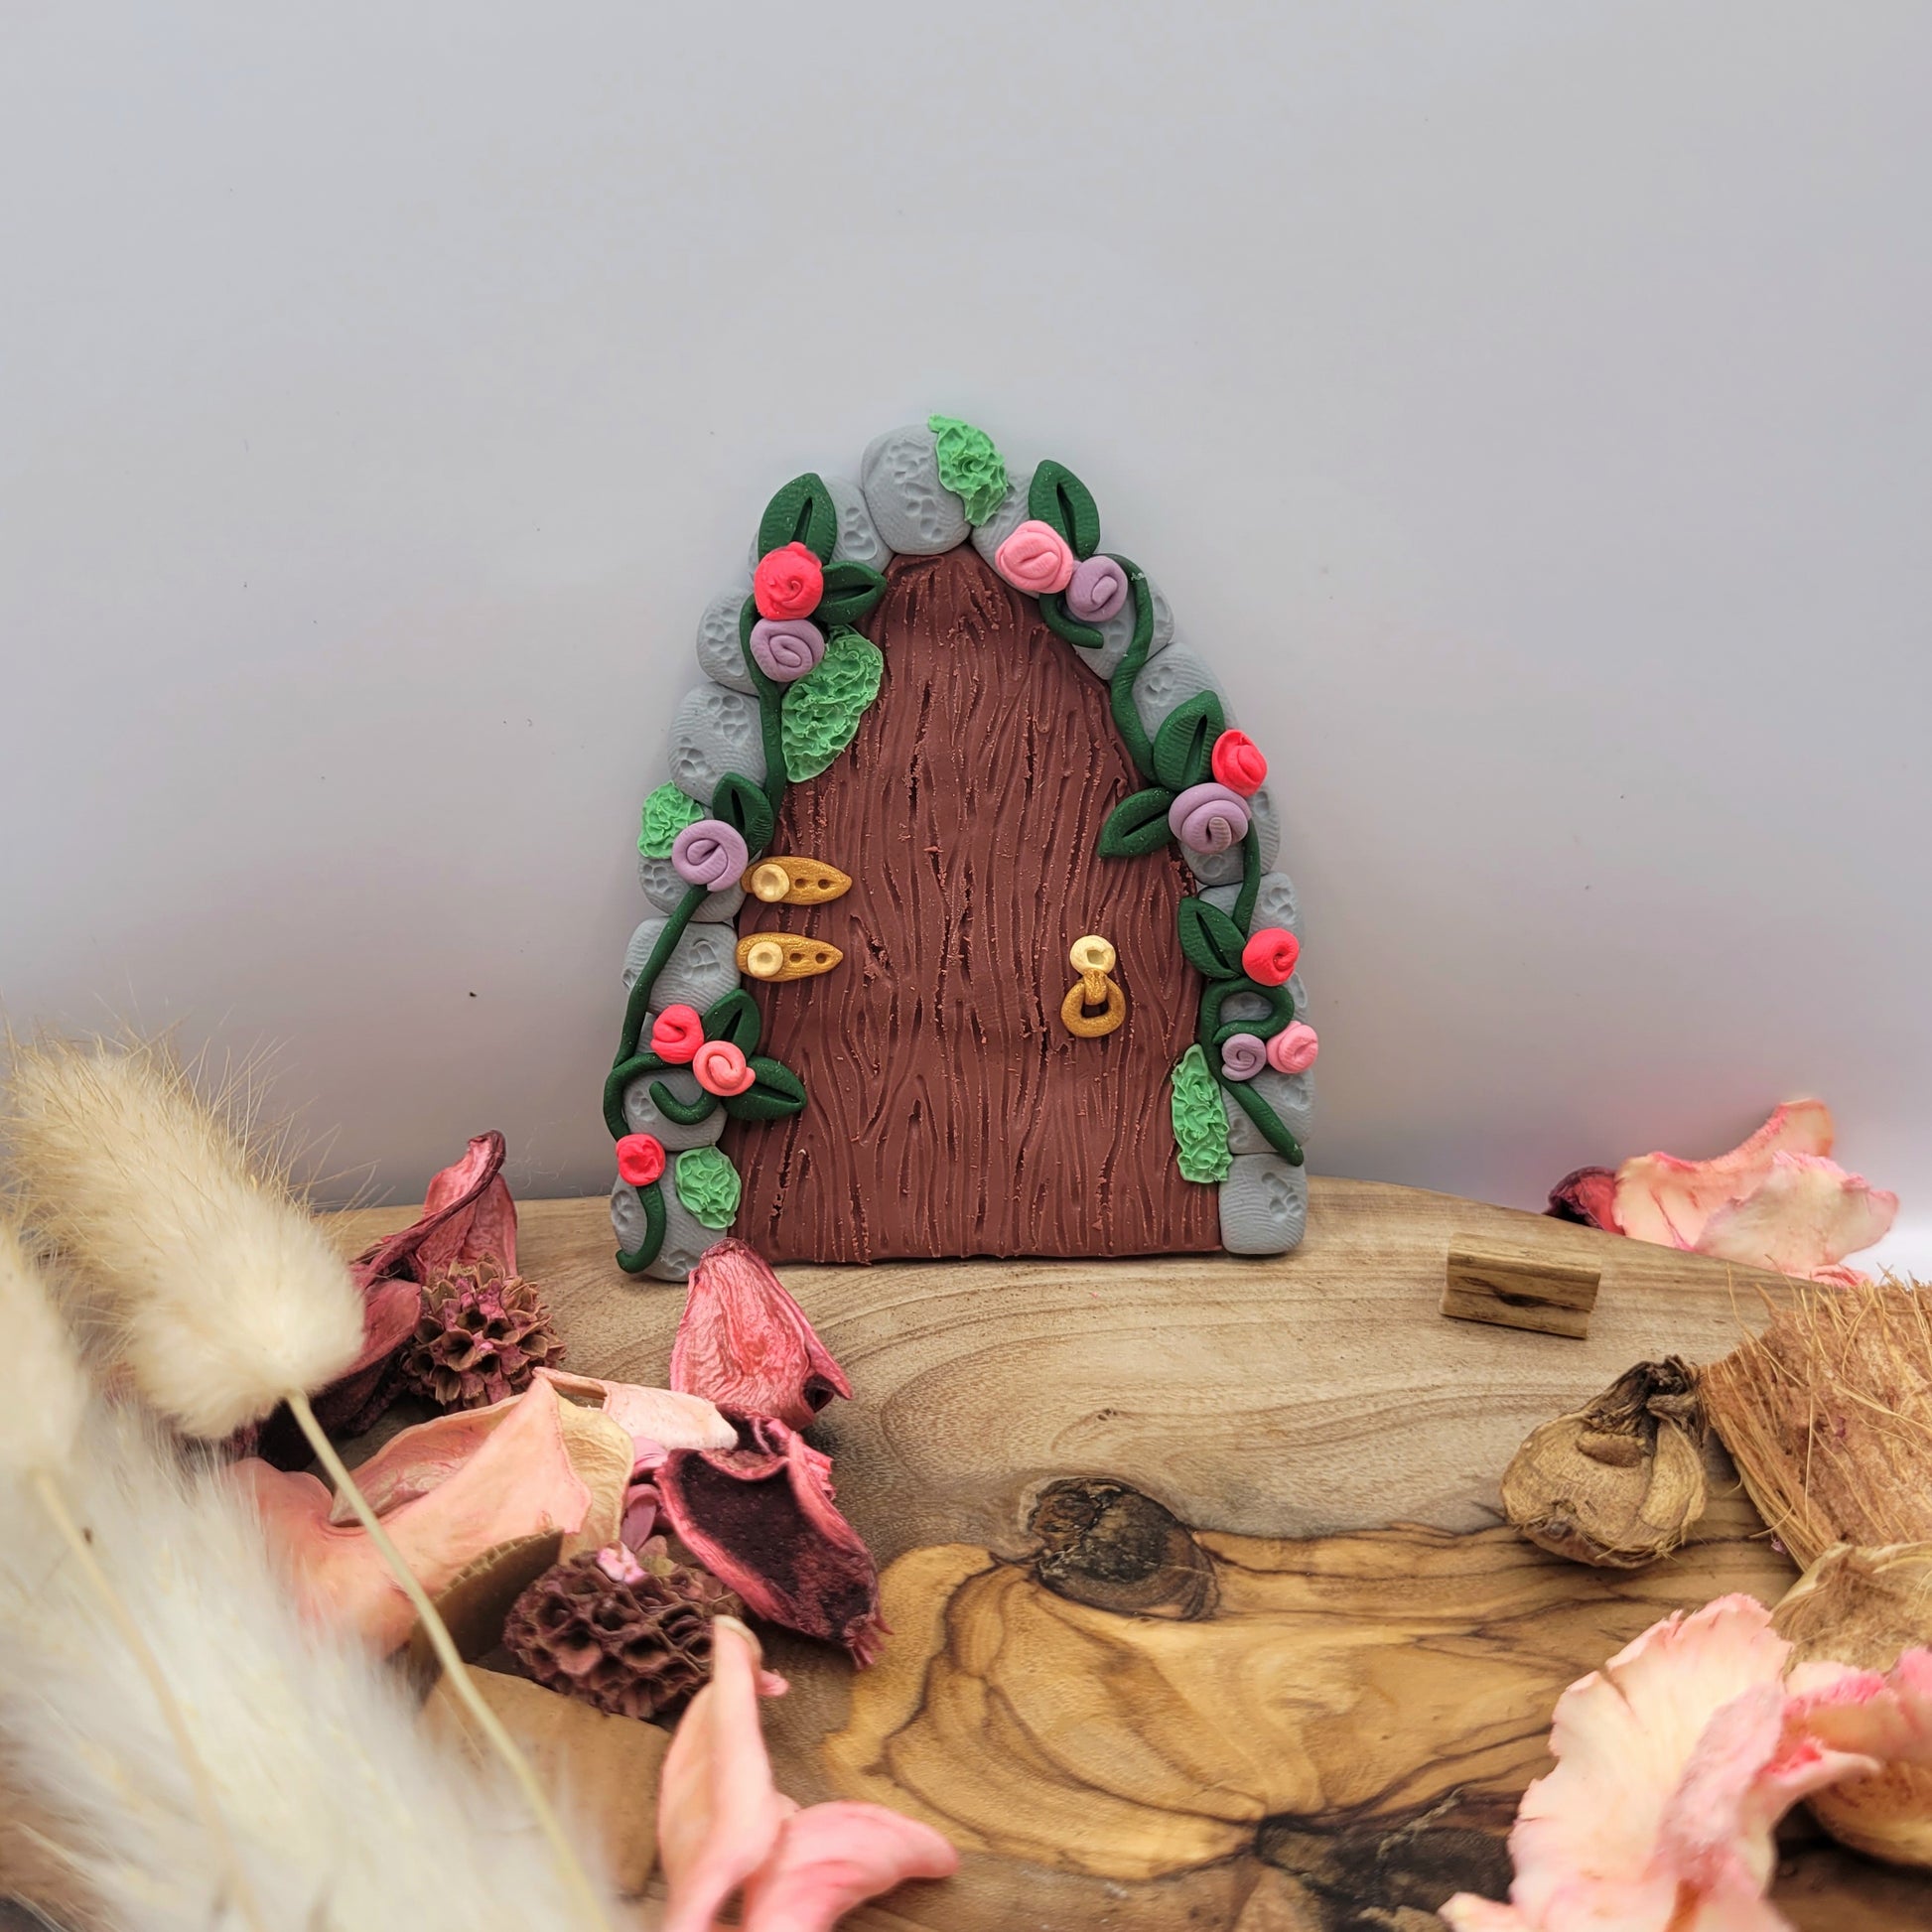 The fairy door rests on an oak wood platform surrounded by preserved pink flower petals, wood pieces and willows. The secret garden door is a maroon wood pattern with grey cobblestone finish and gold hinges and door handle. It is detailed with green vines and pink and purple flowers.